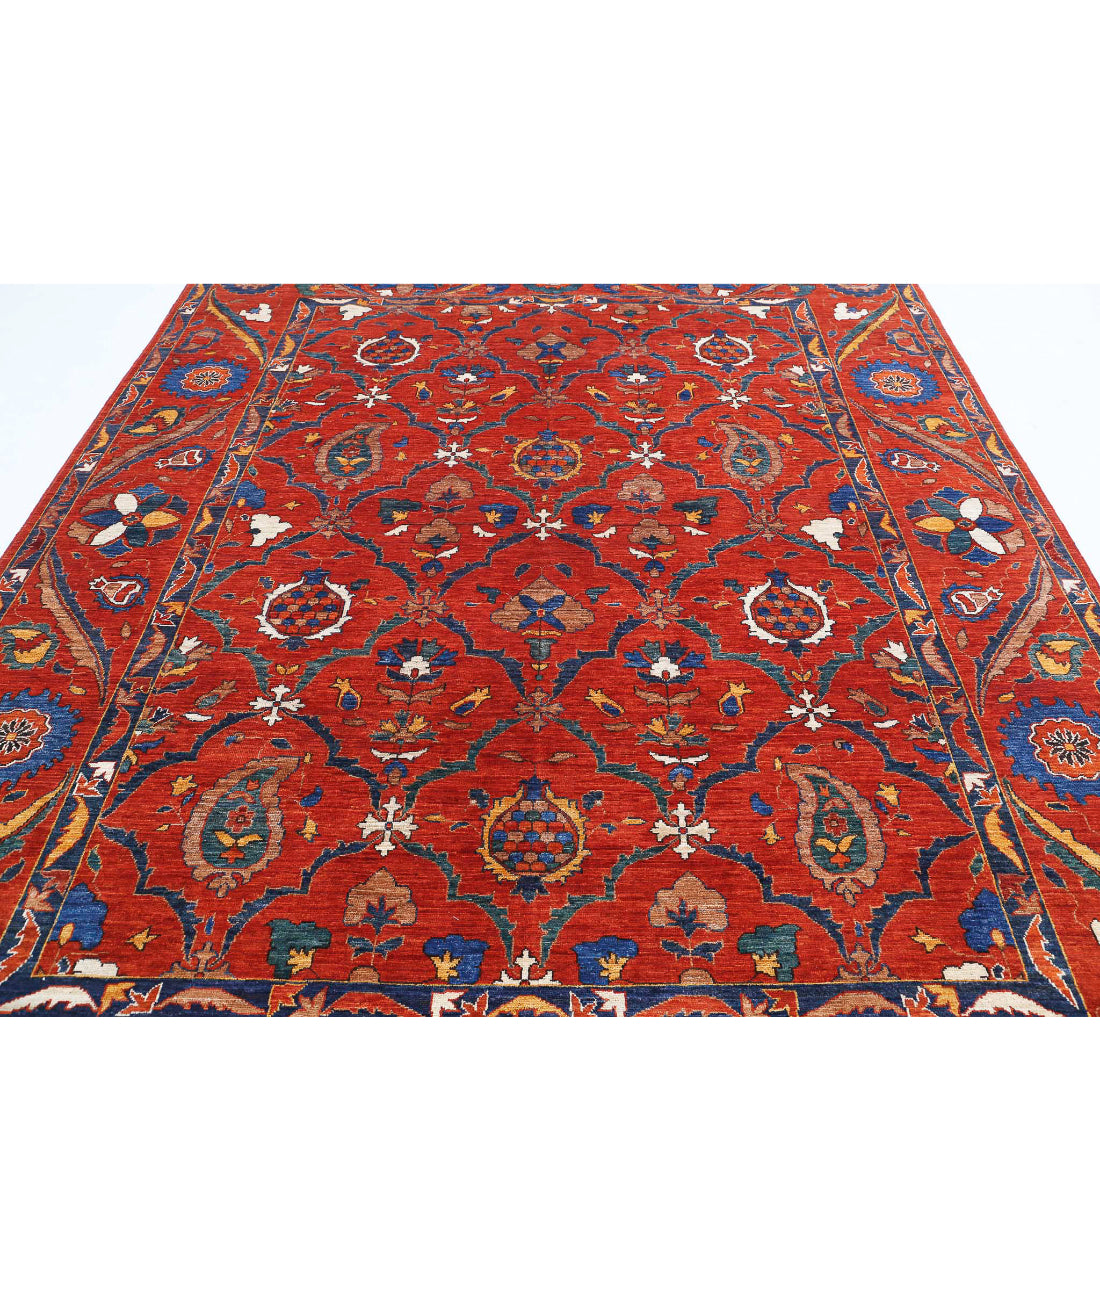 Hand Knotted Nomadic Caucasian Humna Wool Rug - 8'4'' x 10'1'' 8'4'' x 10'1'' (250 X 303) / Red / Blue